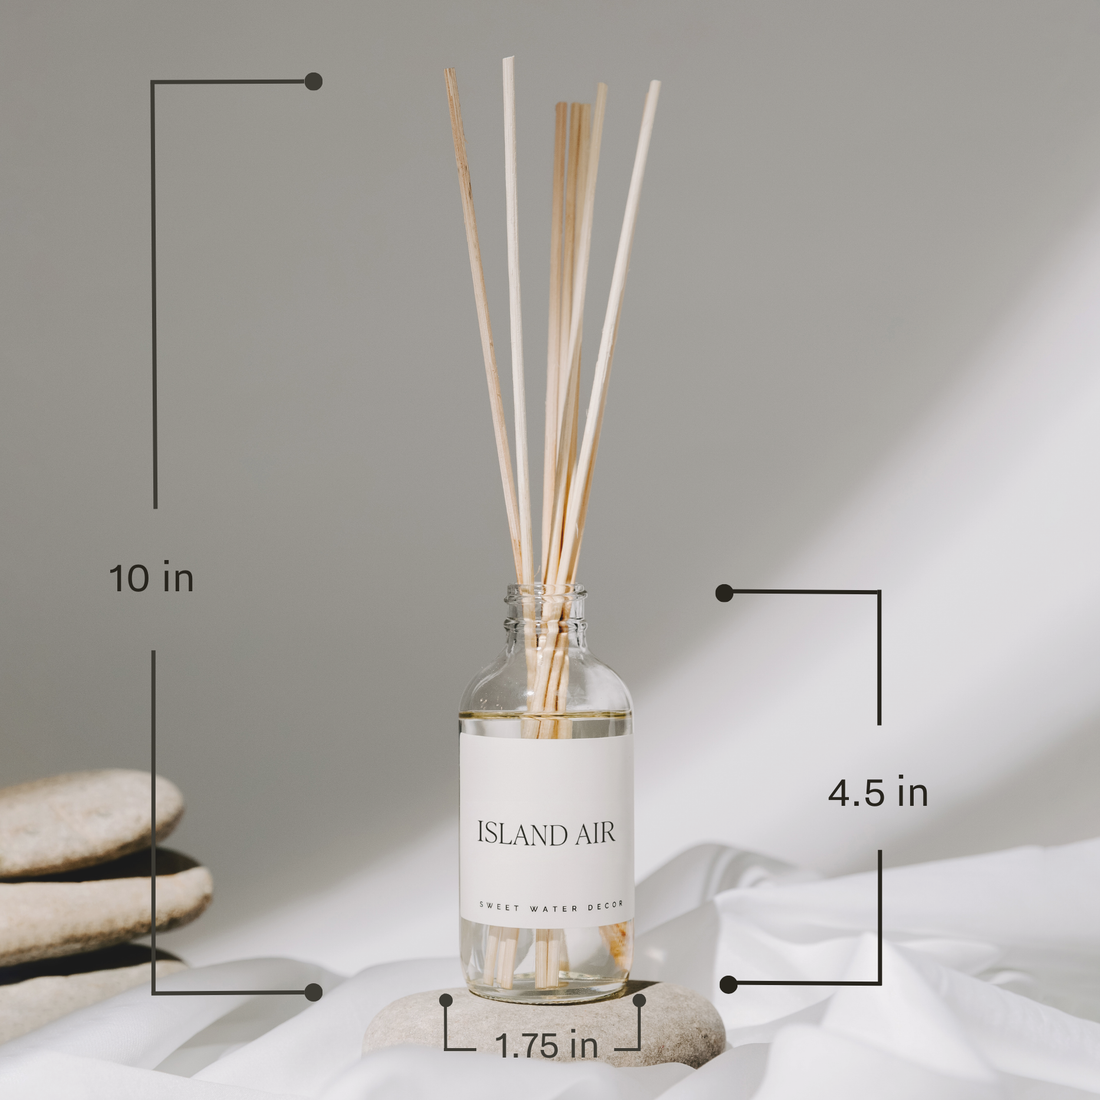 Wildflowers and Salt Reed Diffuser